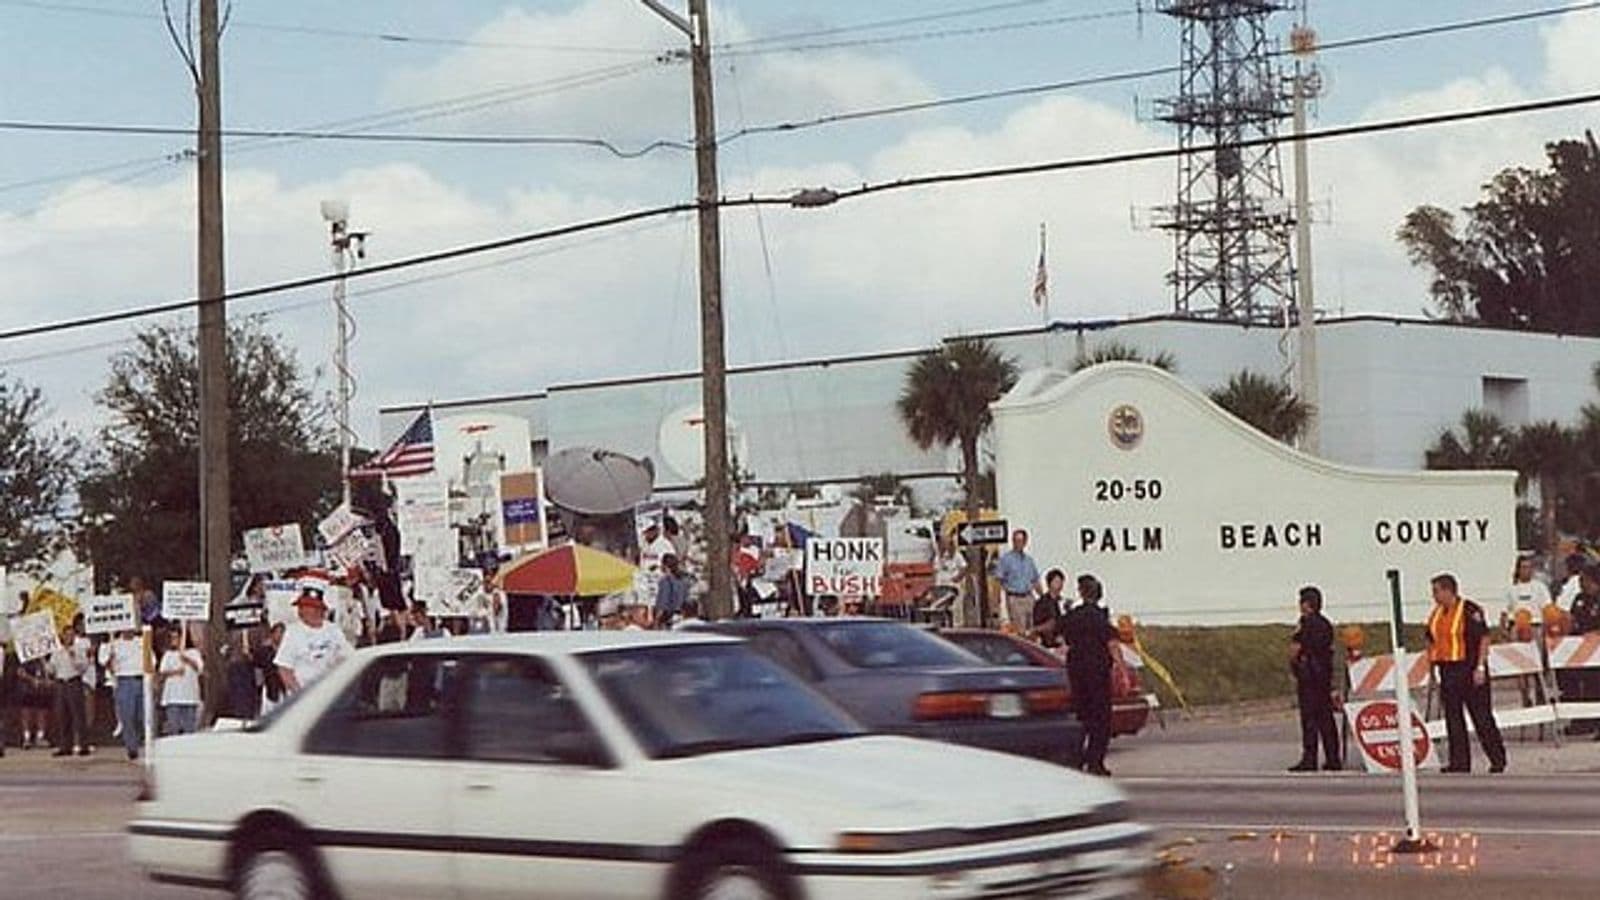 Protestors at Palm Beach County recount during 2000 election aftermath.